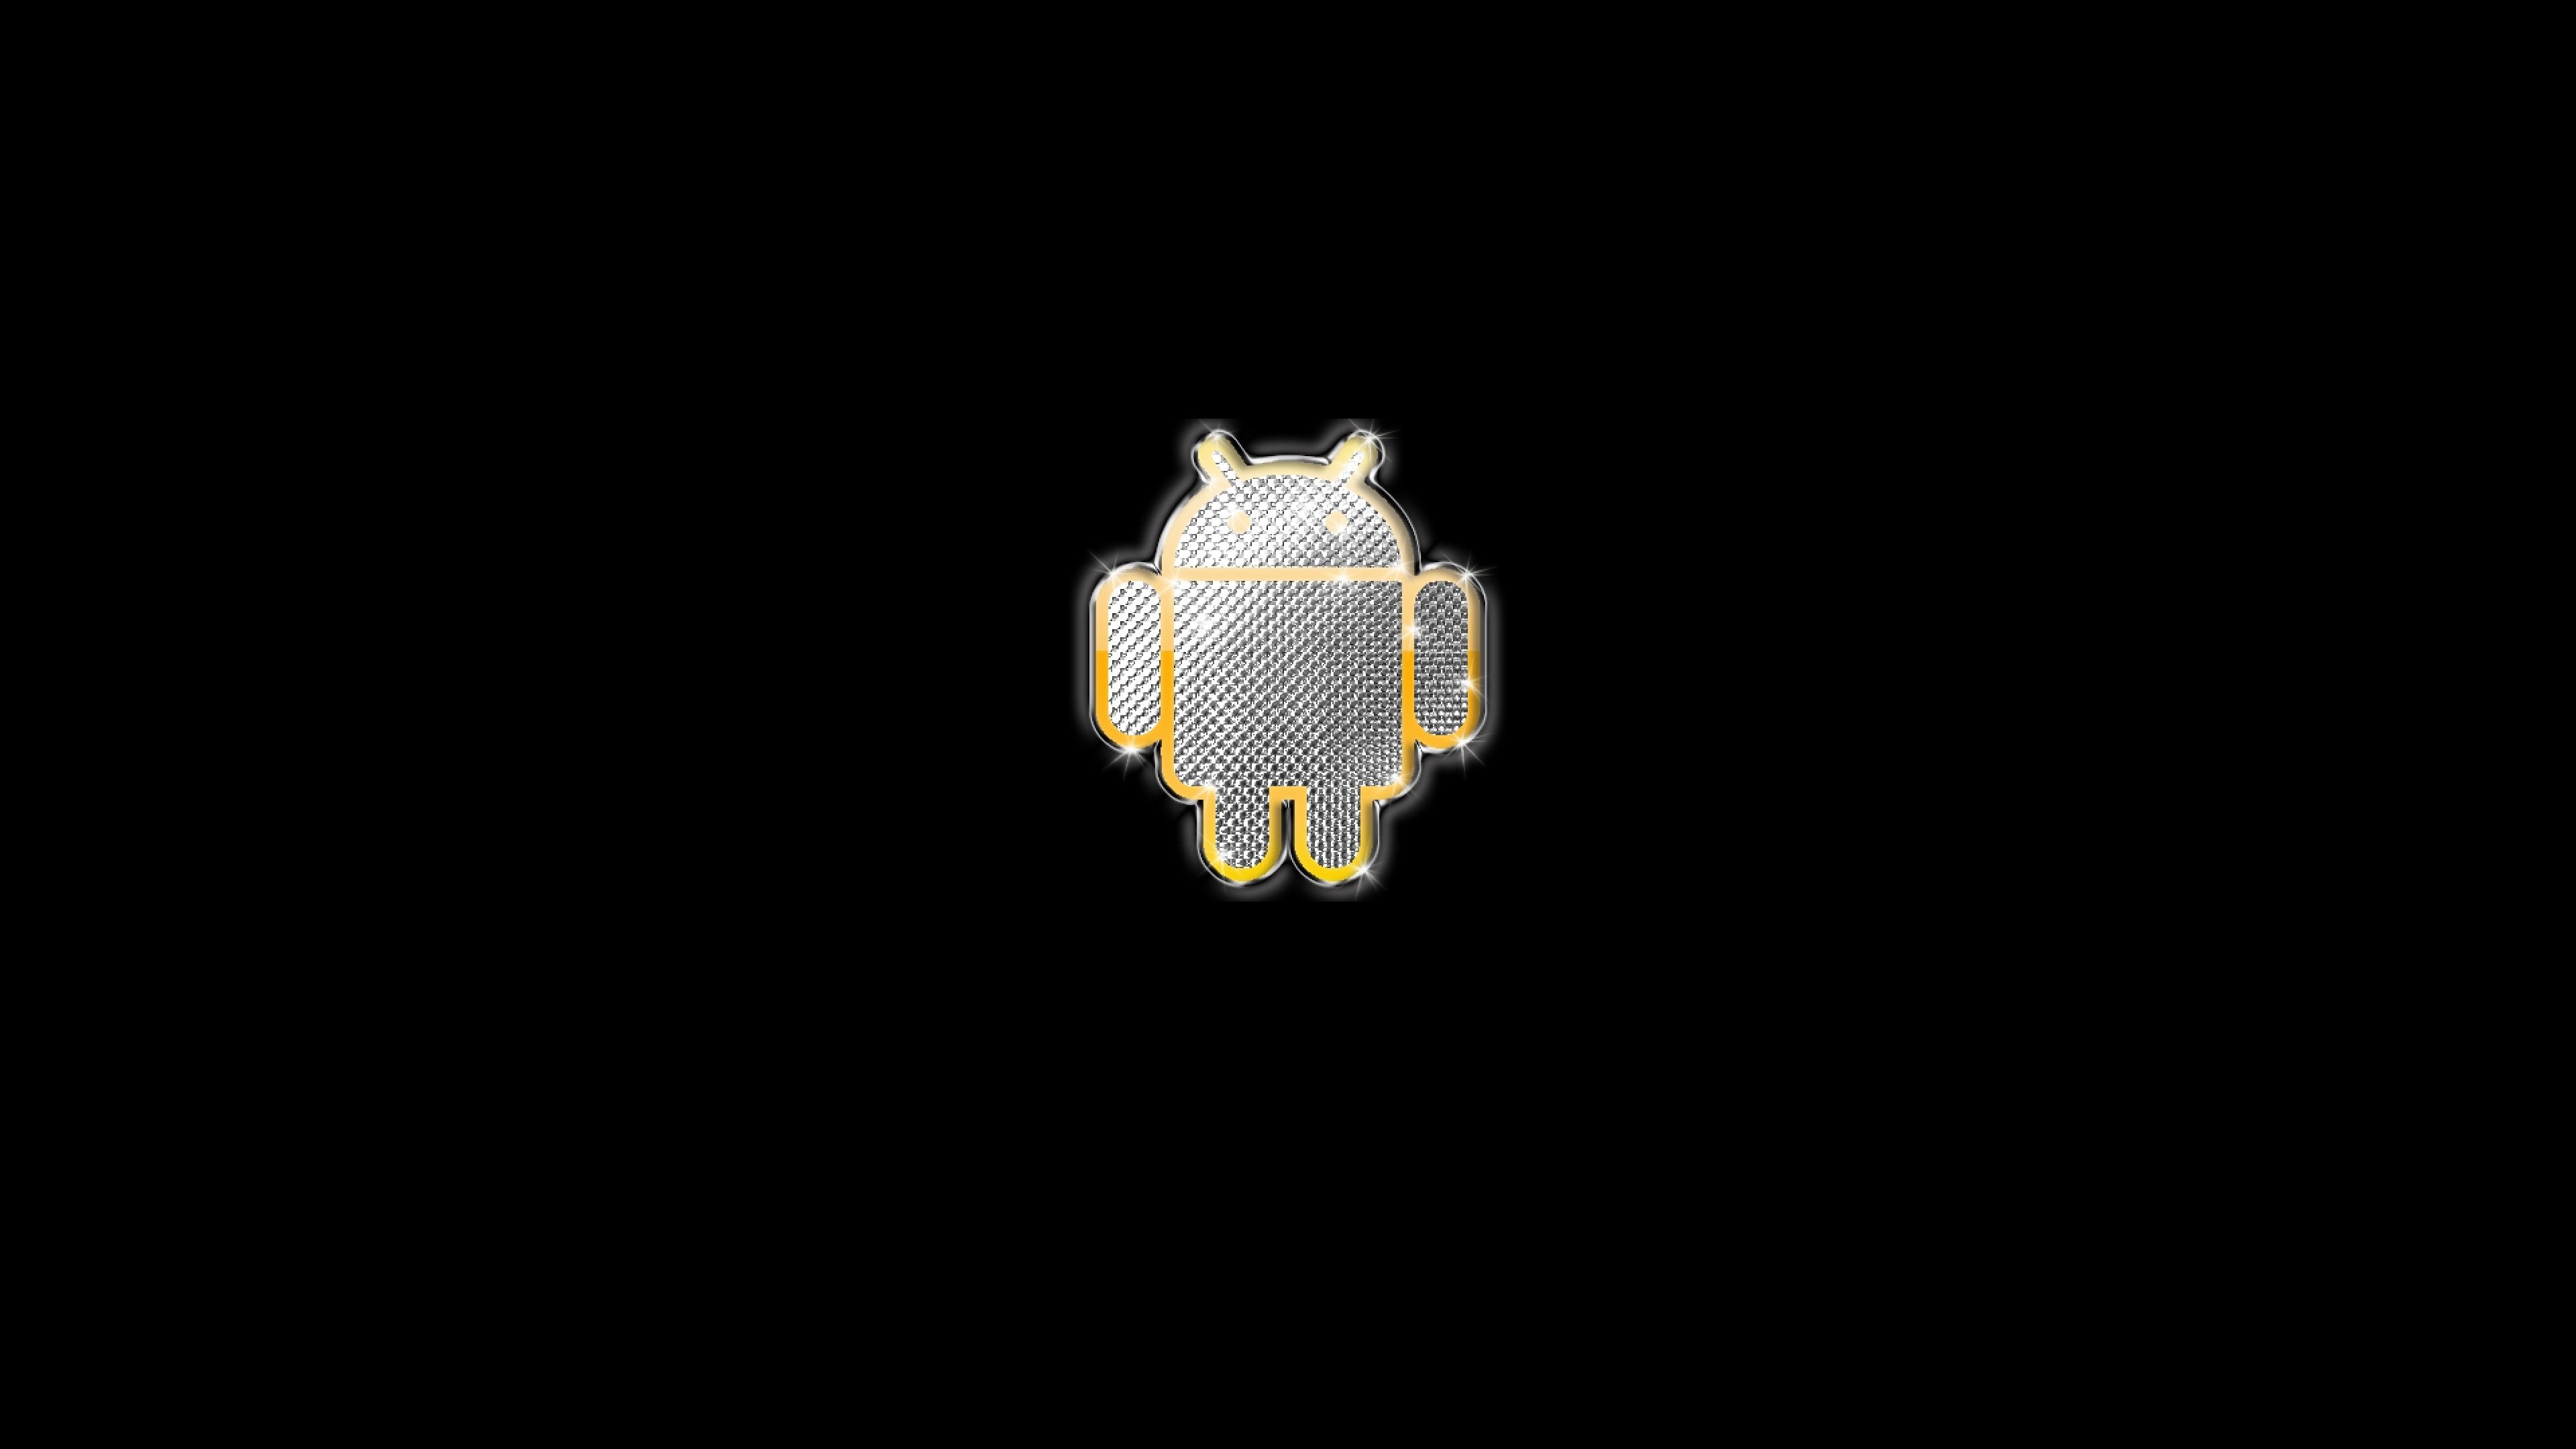 3840x2160  Wallpaper android, robot, gold